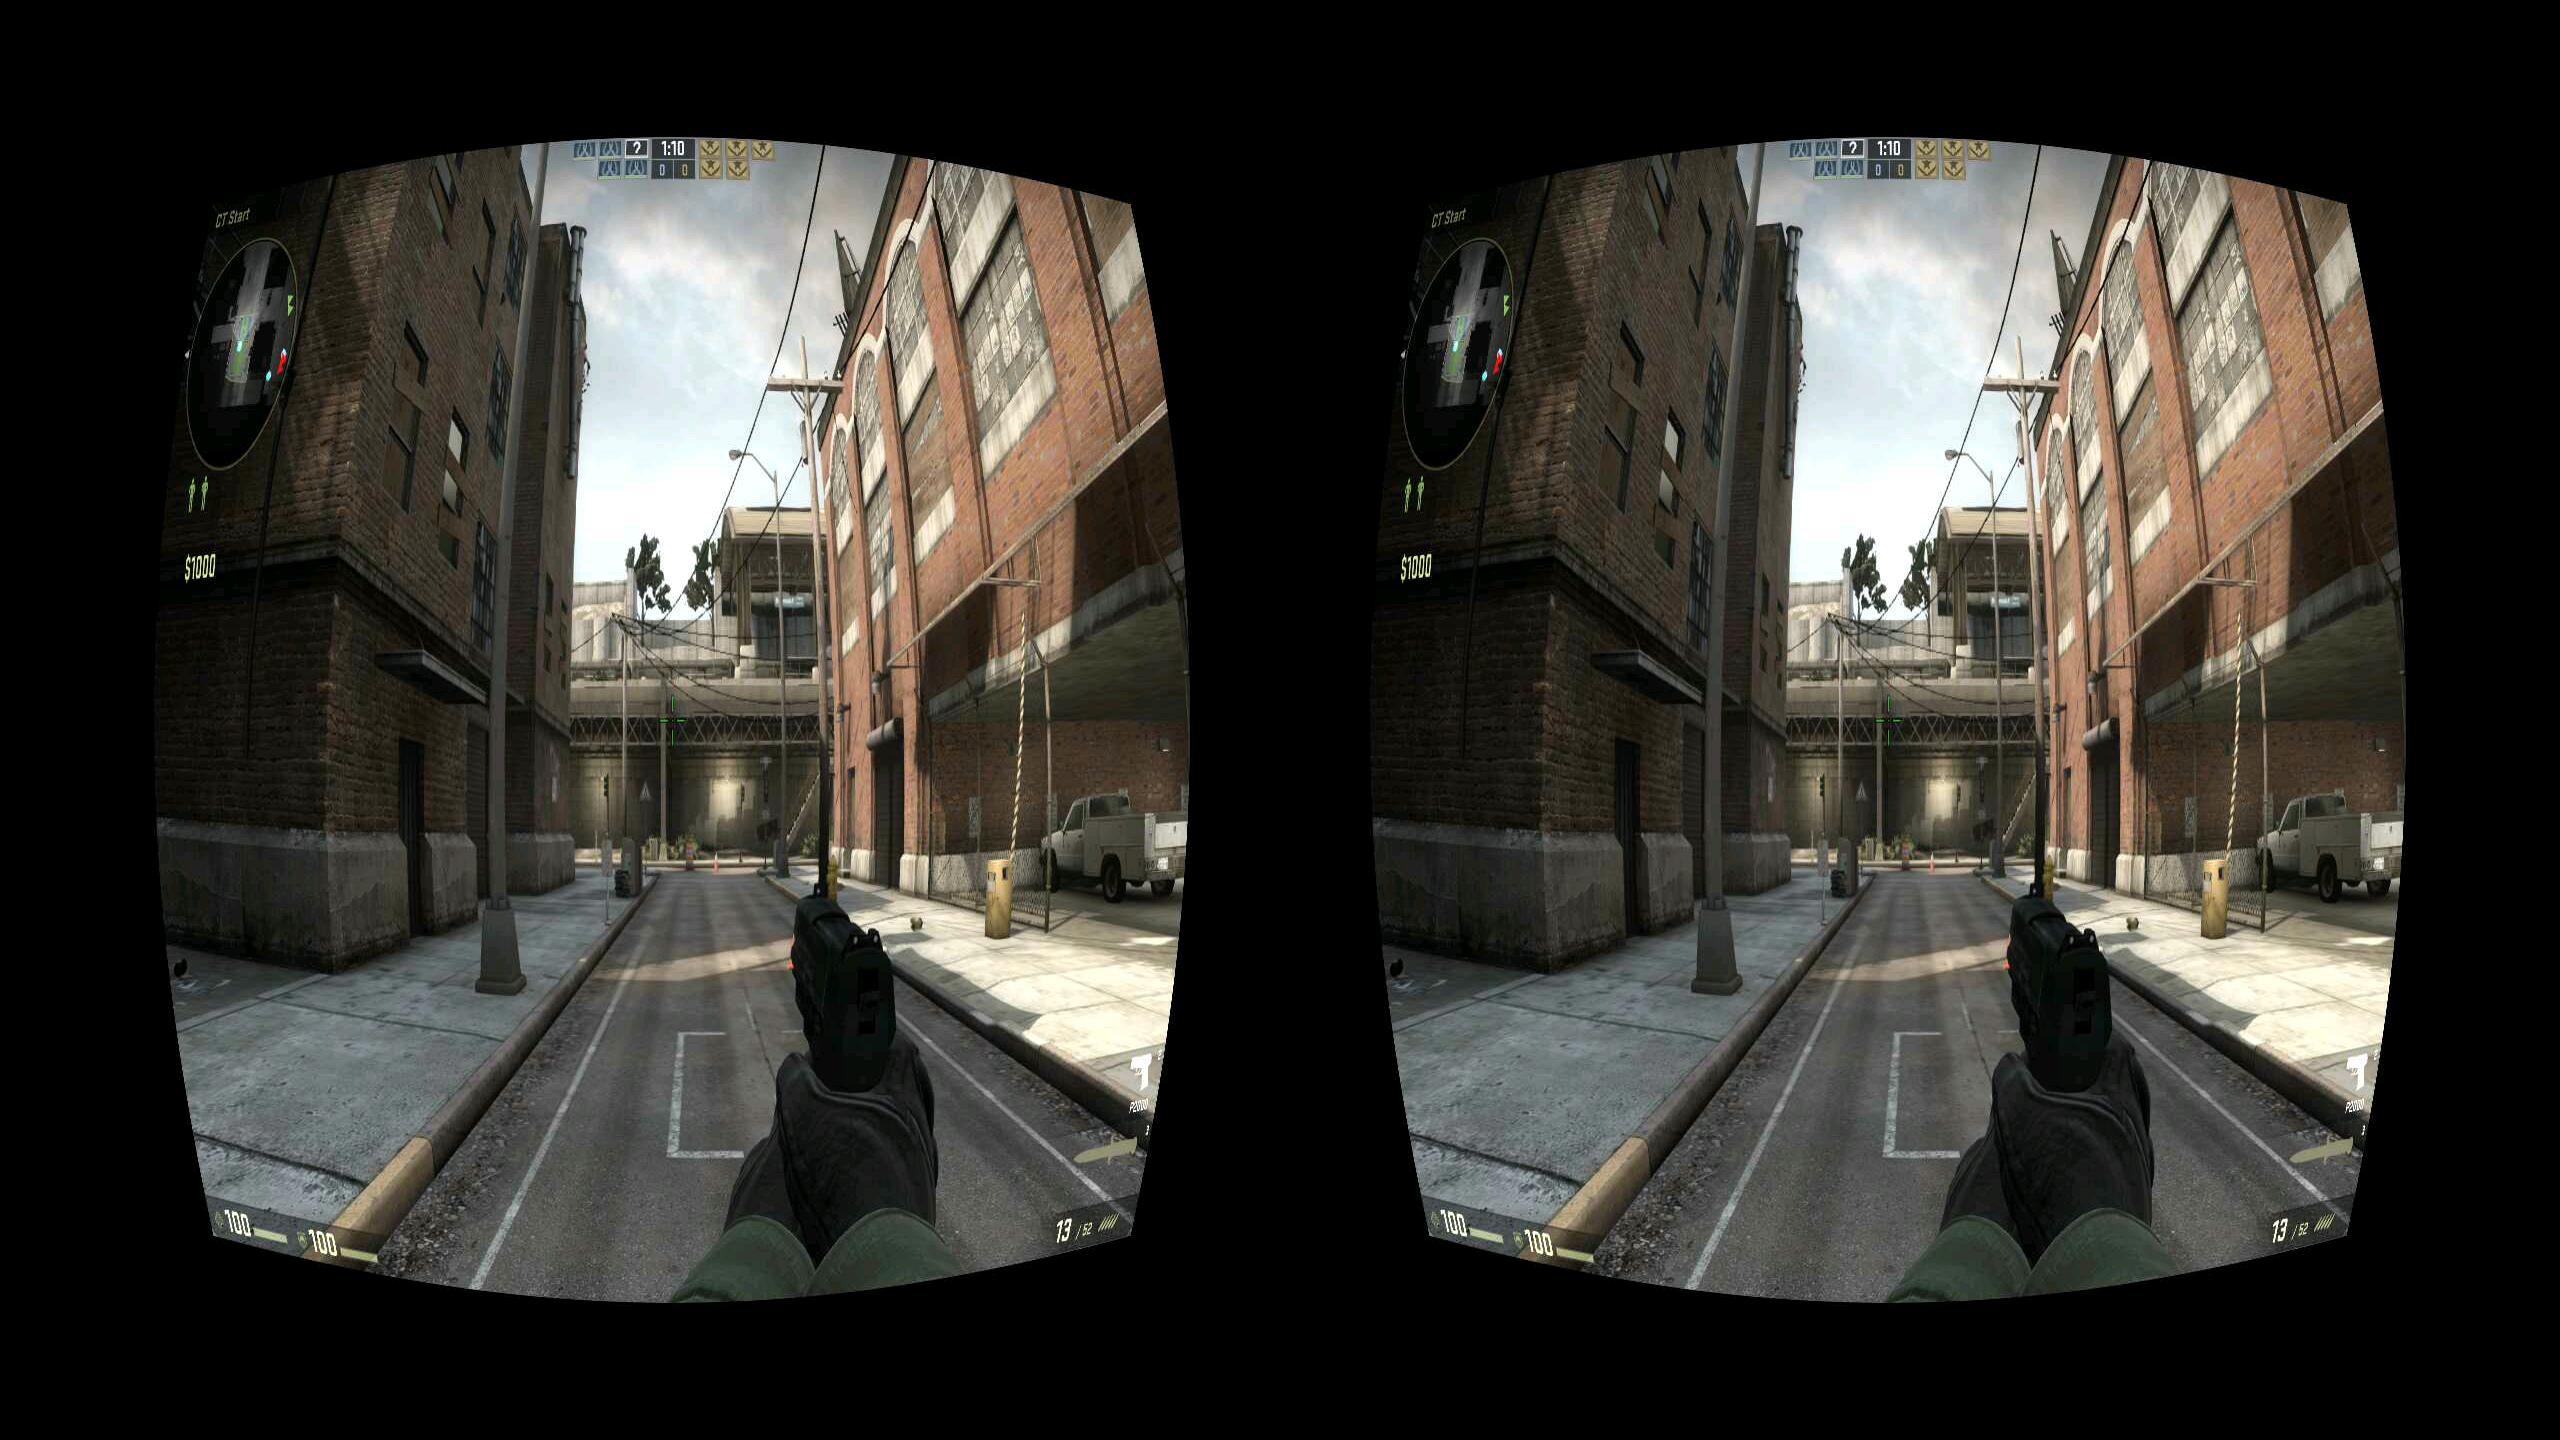 Intugame Gear VR for Android - APK Download